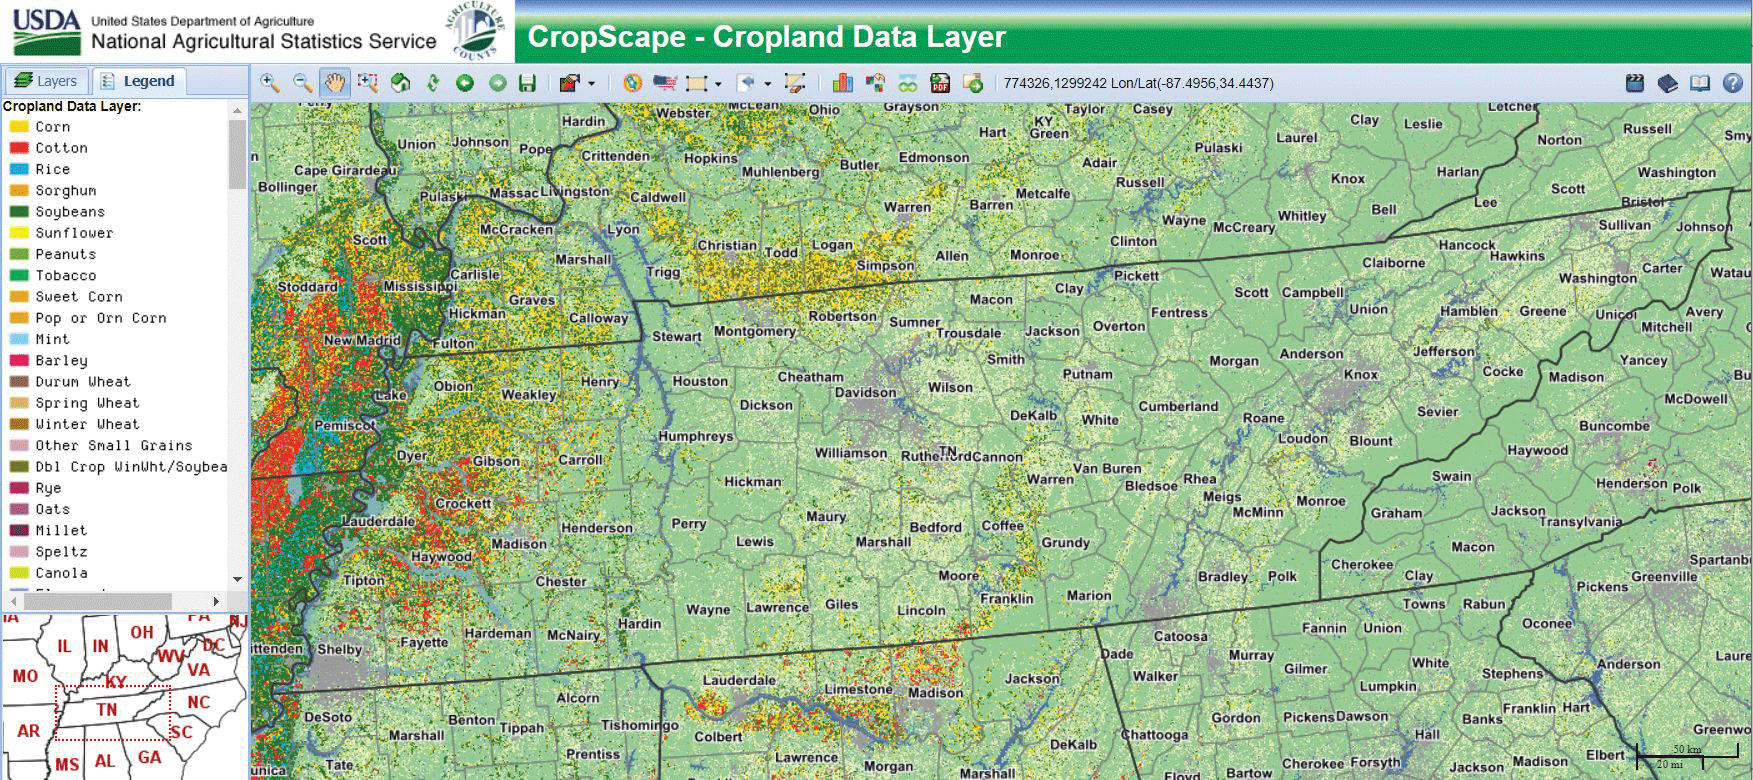 Screen capture showing cropland types in Tennessee.